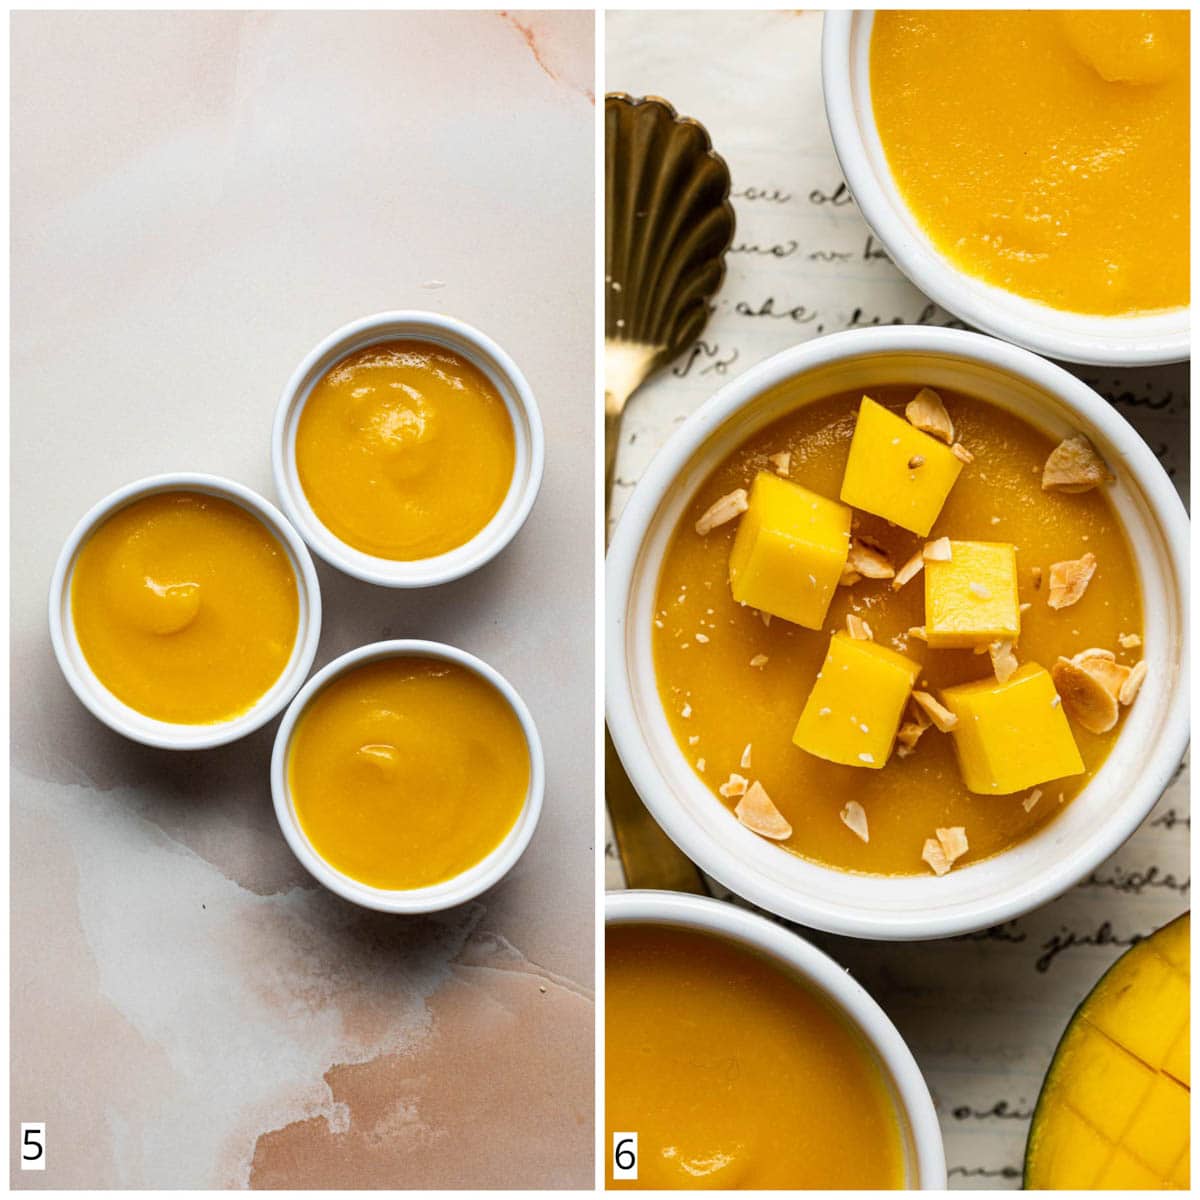 A collage of two images showing mango puree before and after setting.